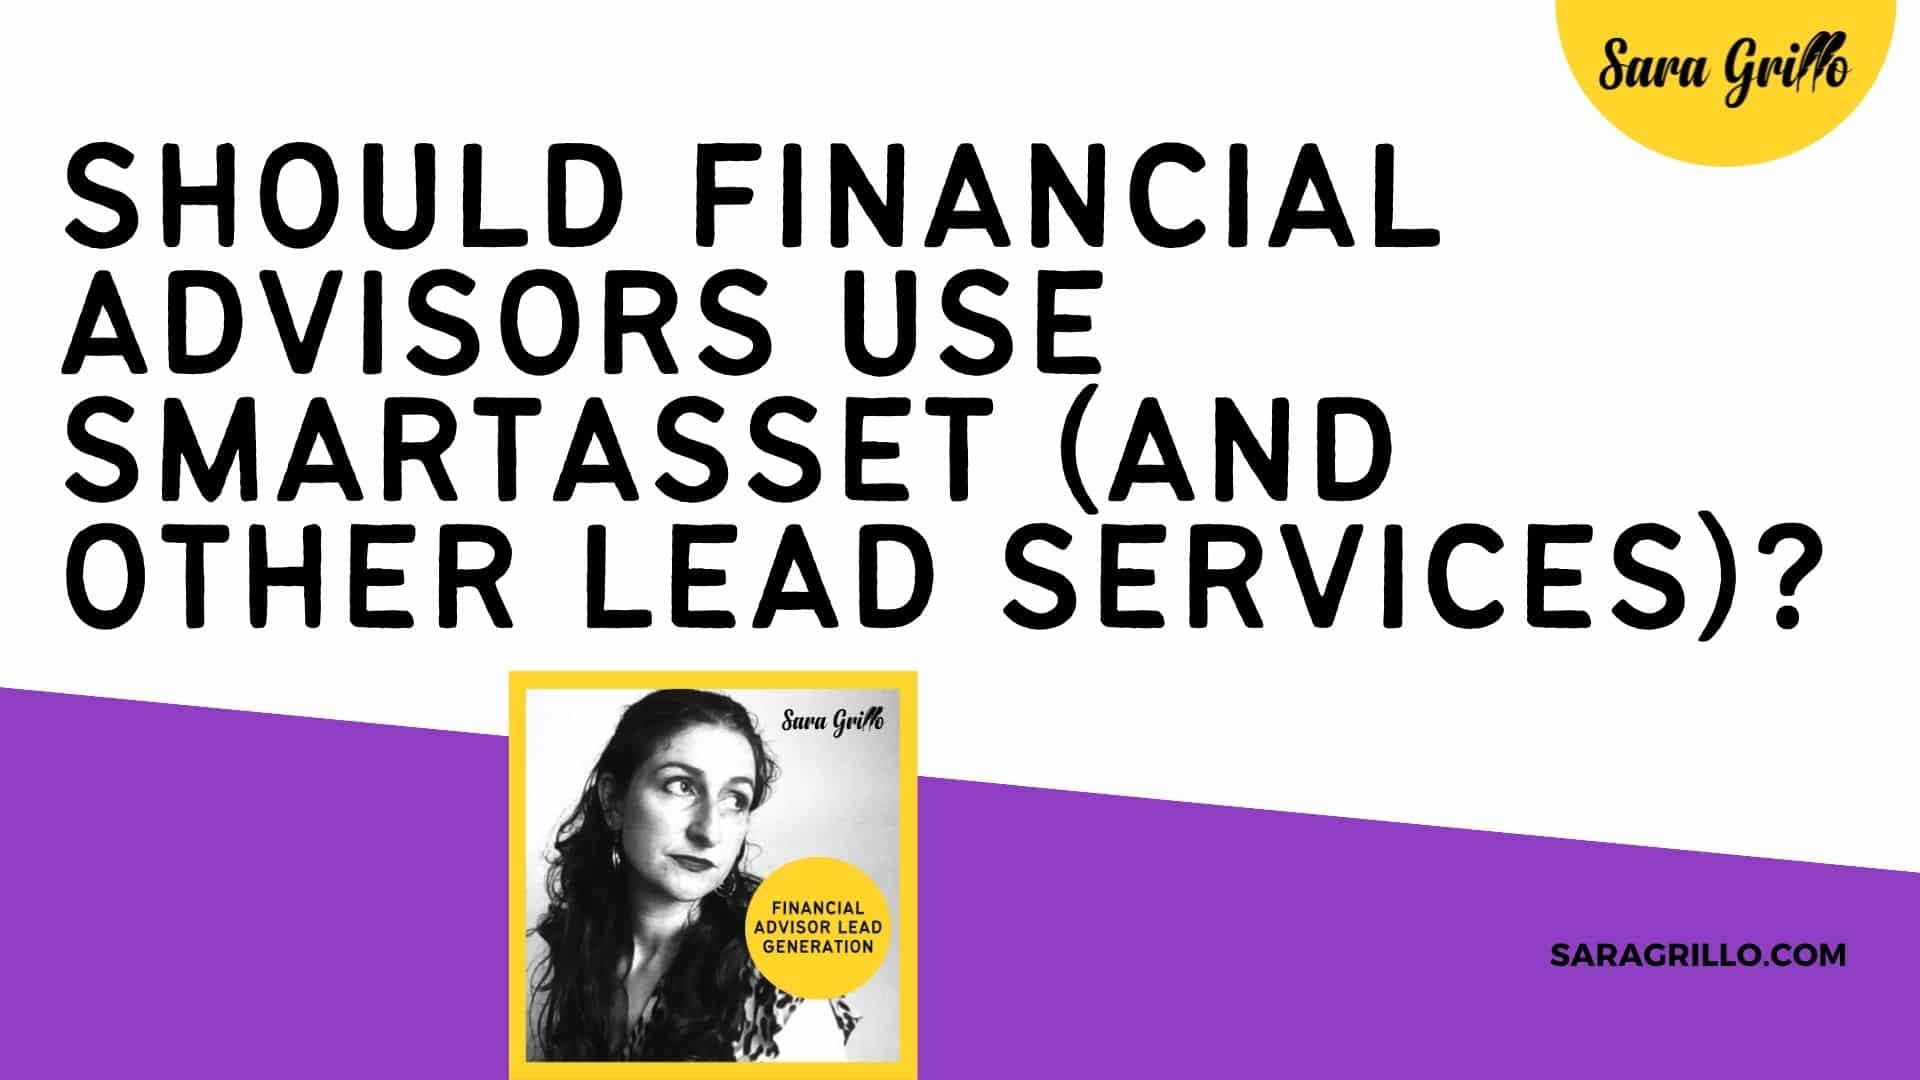 In this blog I discuss should financial advisors use SmartAsset and other lead services or are they are colossal waste of money. I feel it is the latter.